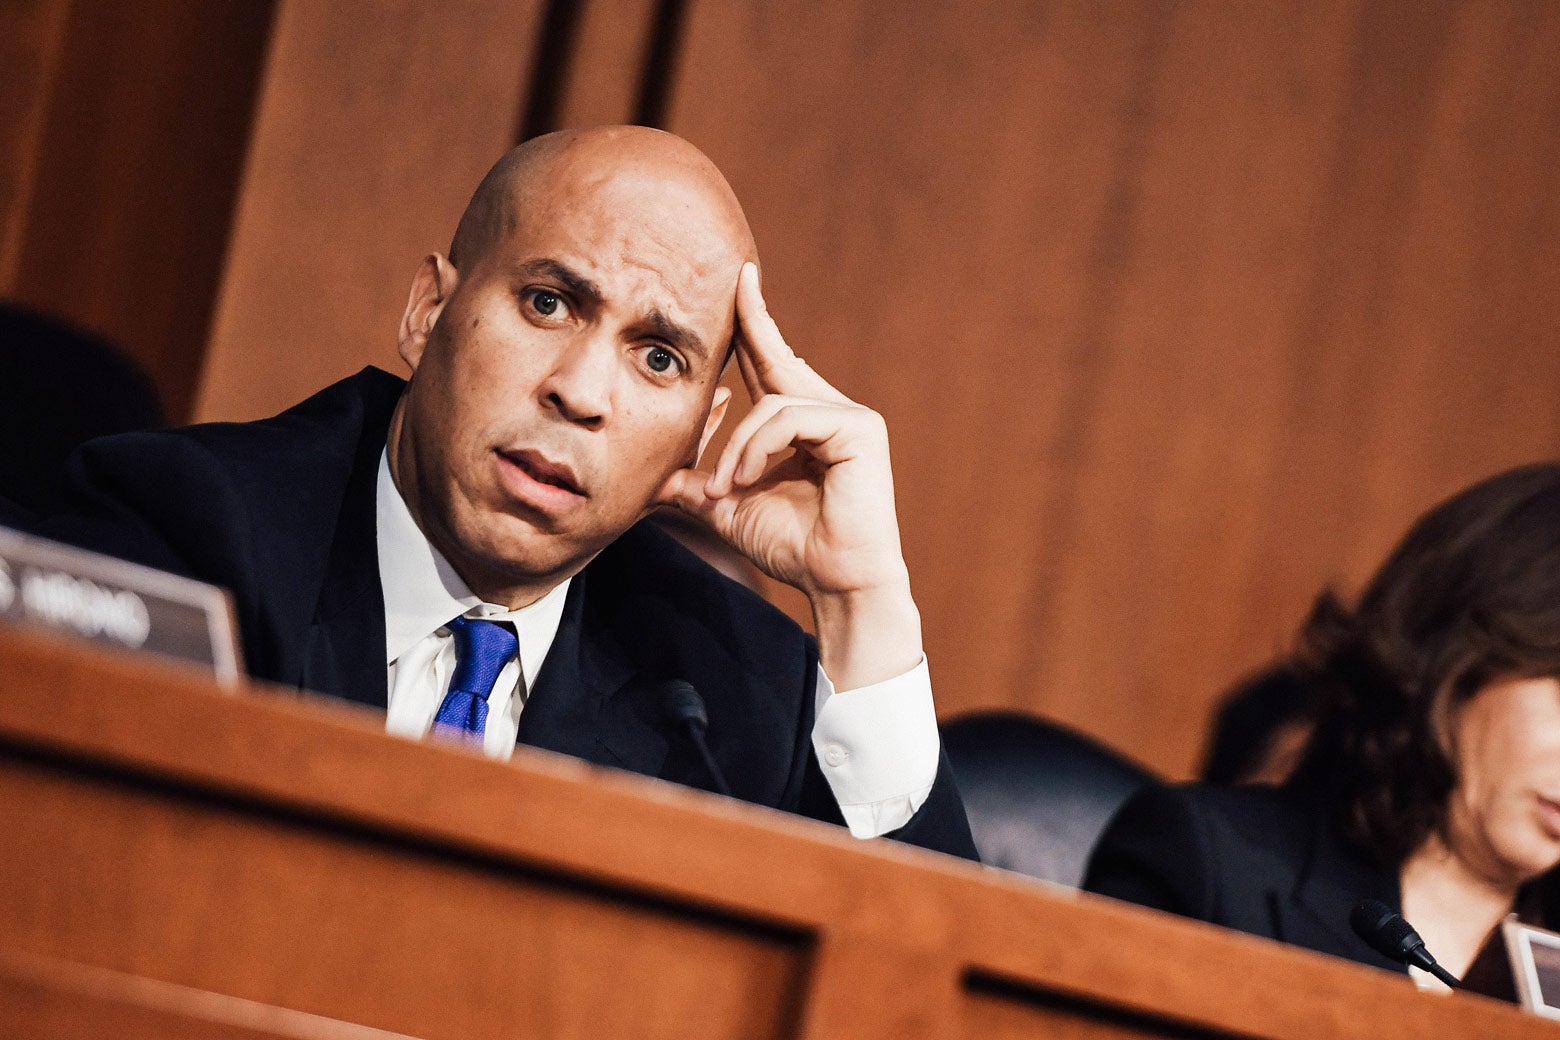 New Jersey Sen. Cory Booker speaks as Brett Kavanaugh attends the first day of his Supreme Court confirmation hearing on Tuesday in Washington.